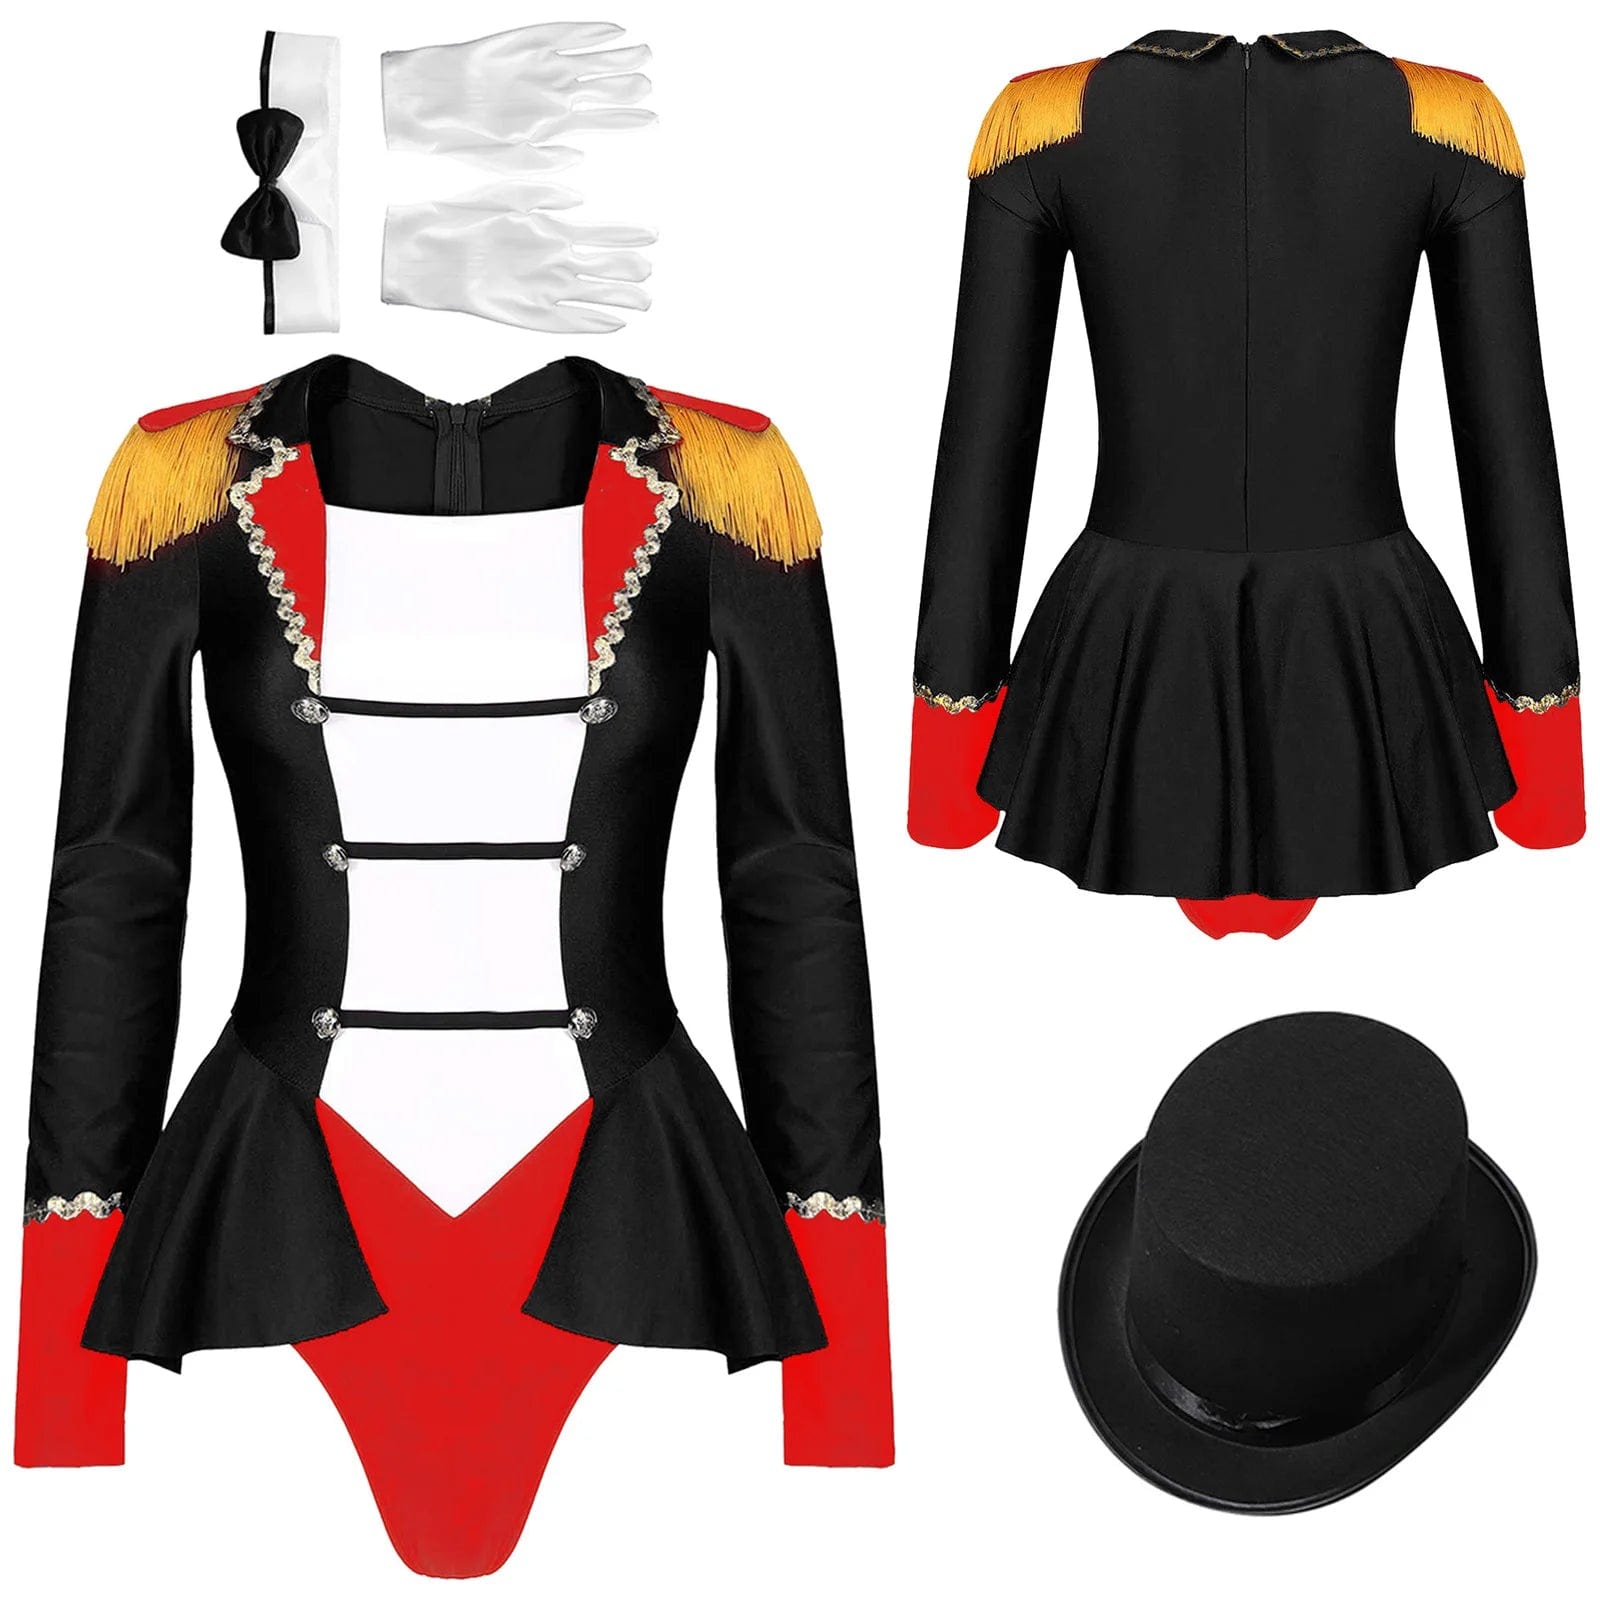 Kinky Cloth Black E / S Circus Ringmaster Outfit Costumes